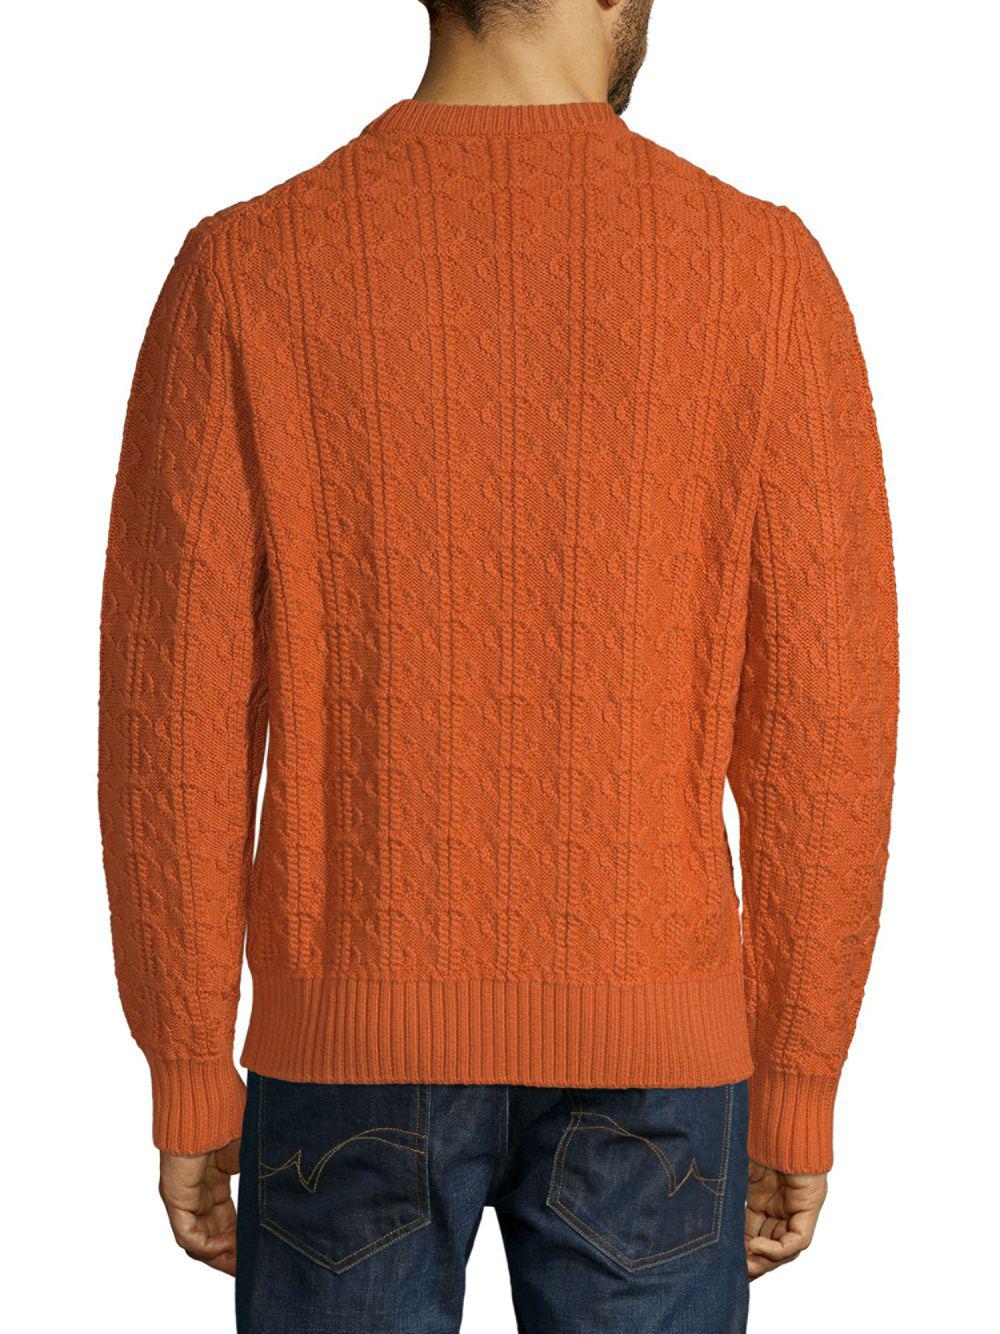 Brioni Cable-knit Wool Sweater in Orange for Men - Lyst